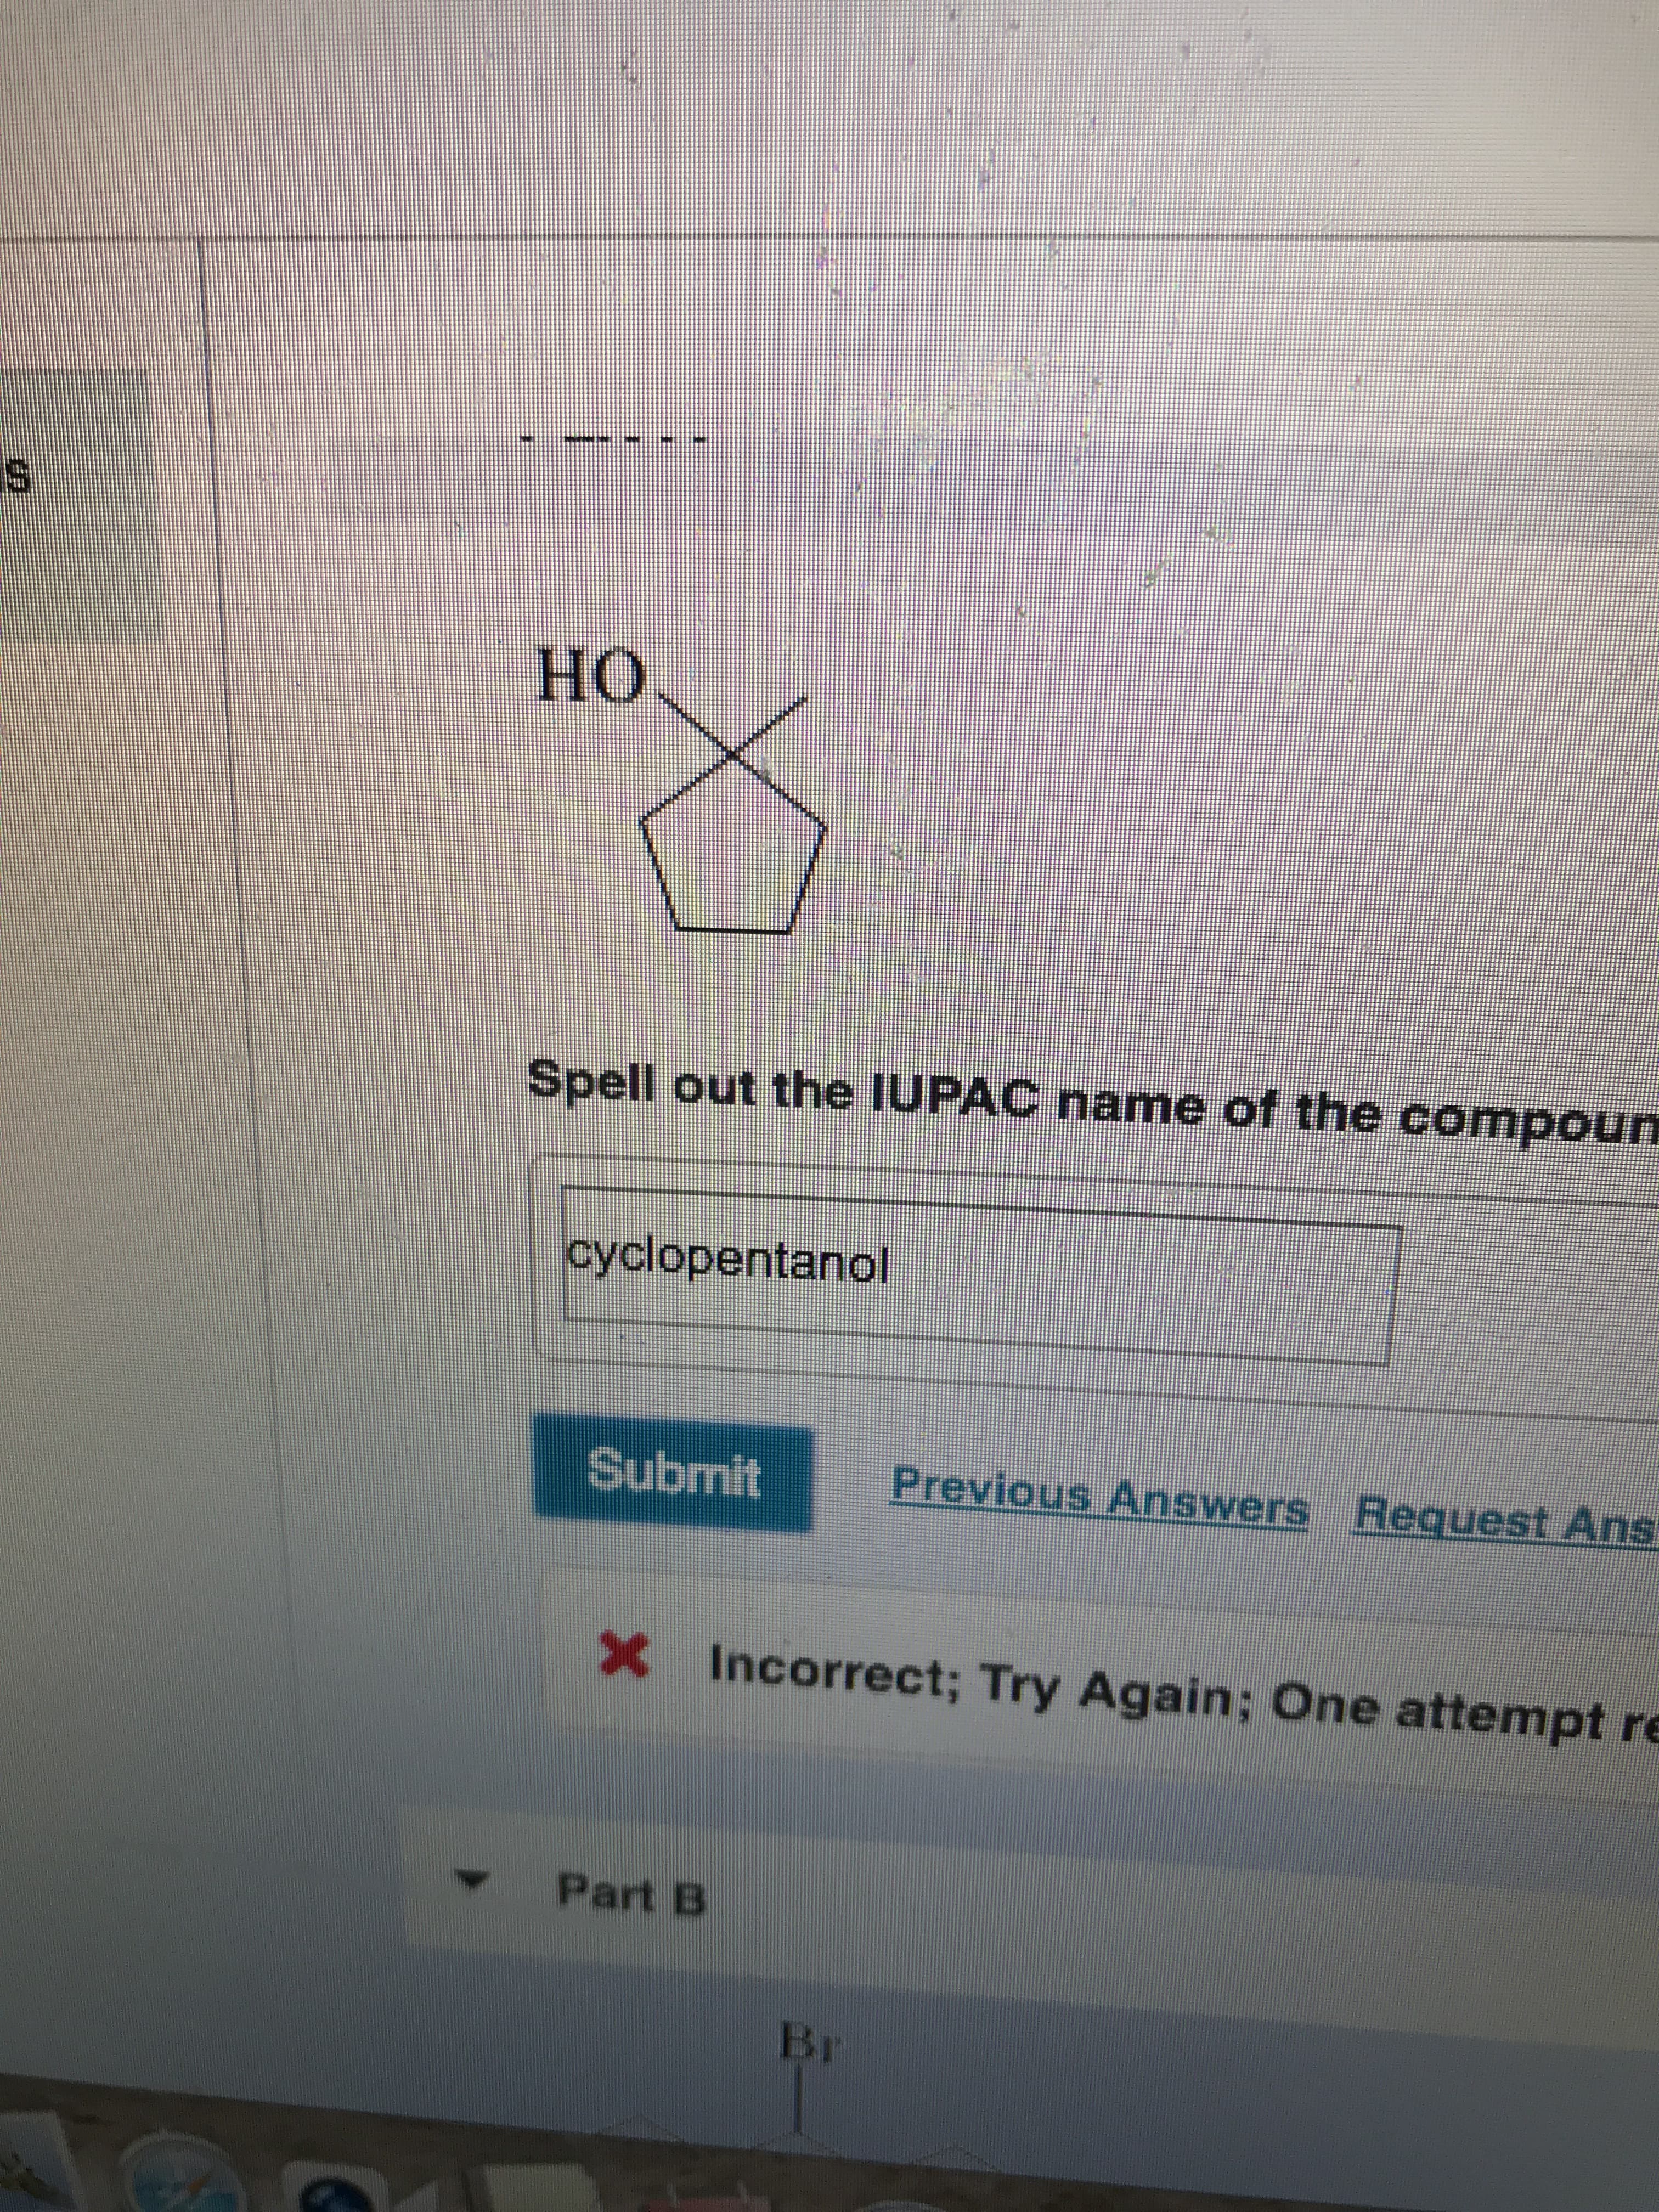 но
Spell out the IUPAC name of the compoun
cyclopentanol
Previous Answers Request Ans
Submit
X Incorrect; Try Again; One attempt re
Part B
Br
